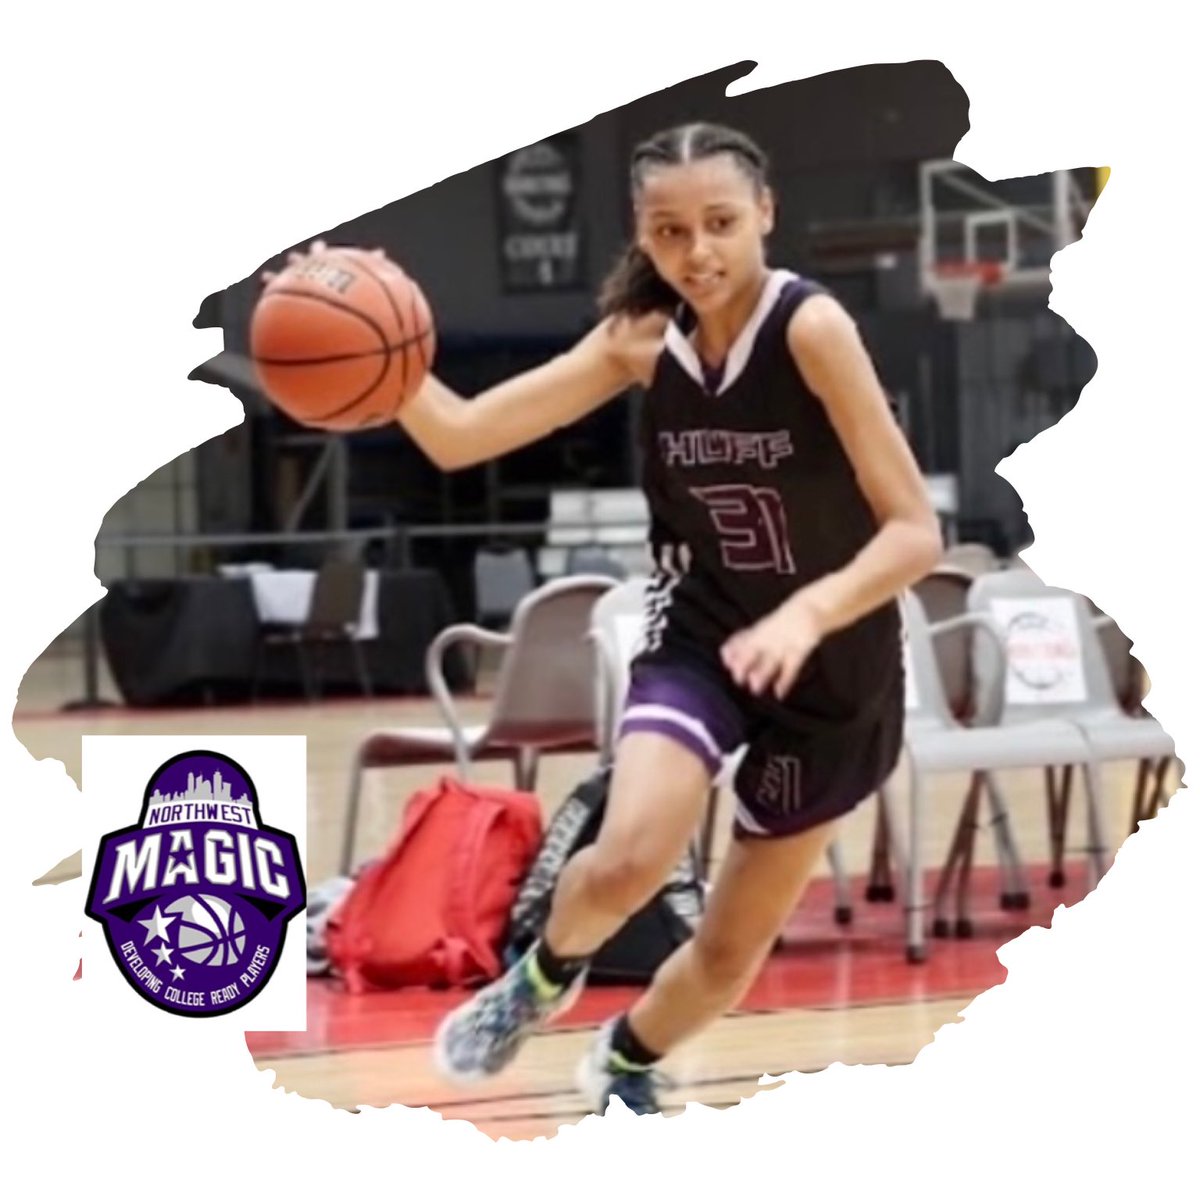 College Coaches - check out Zionna Barbee’s players card for recruiting information 
https://t.co/OTrHrsc1Y0

Zionna Barbee (2022) - Top performer for Franklin Pierce this week averaging 25 points in two games …(26 game 1 & 24 game 2). 

#College Ready 
#NW Magic 30 Player https://t.co/tBEfLYobwJ